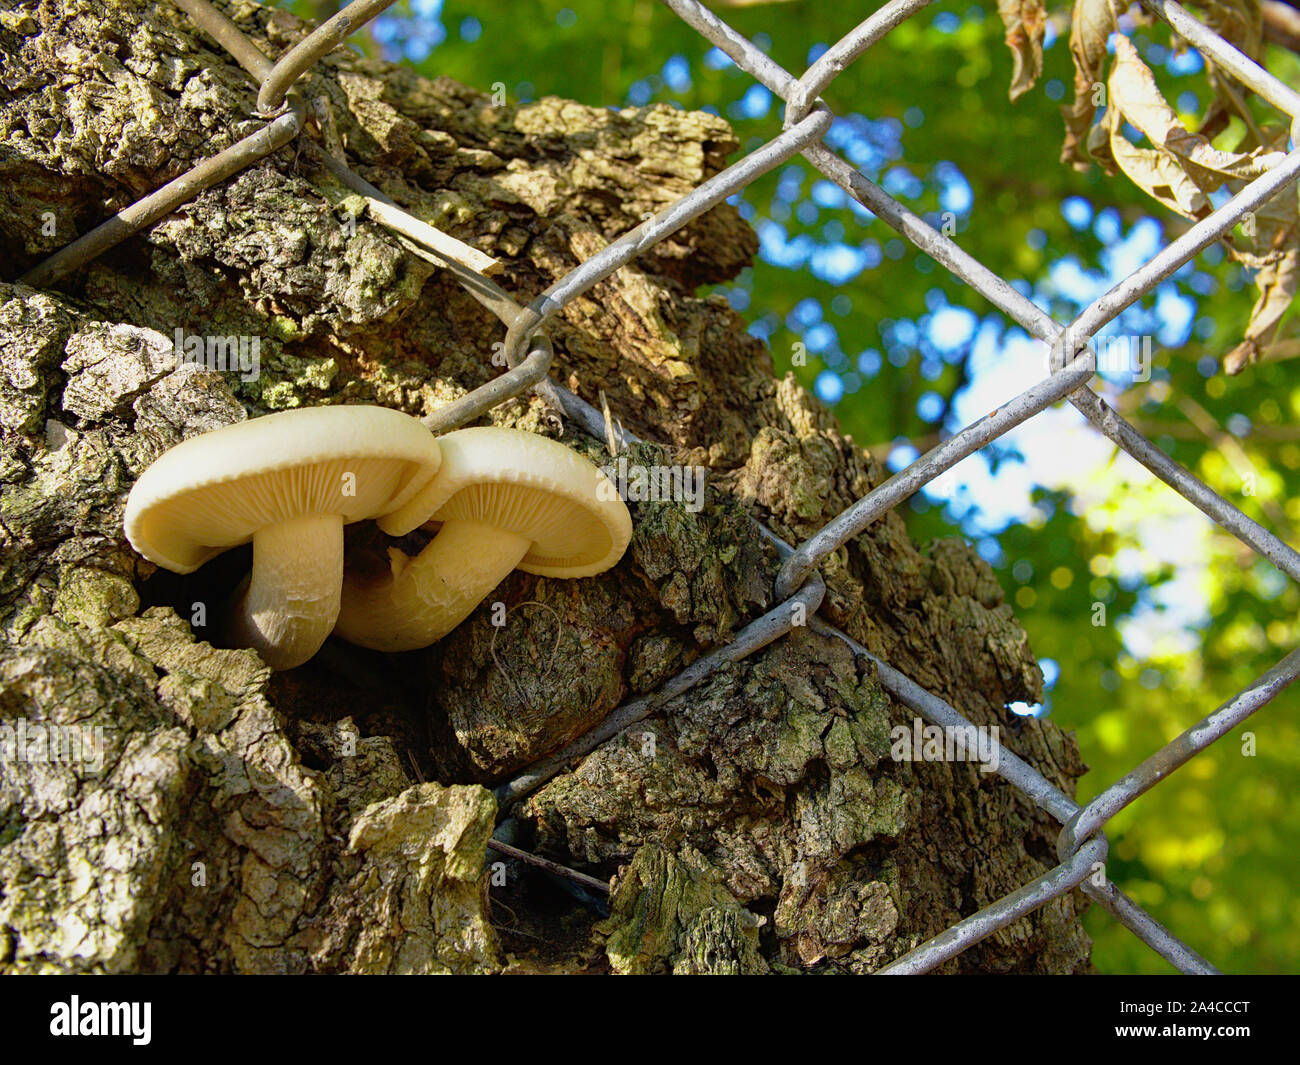 Two perfect white mushroom (Agrocybe cylindracea) growing from a tree between links on a chain link fence. Ottawa, Ontario, Canada. Stock Photo